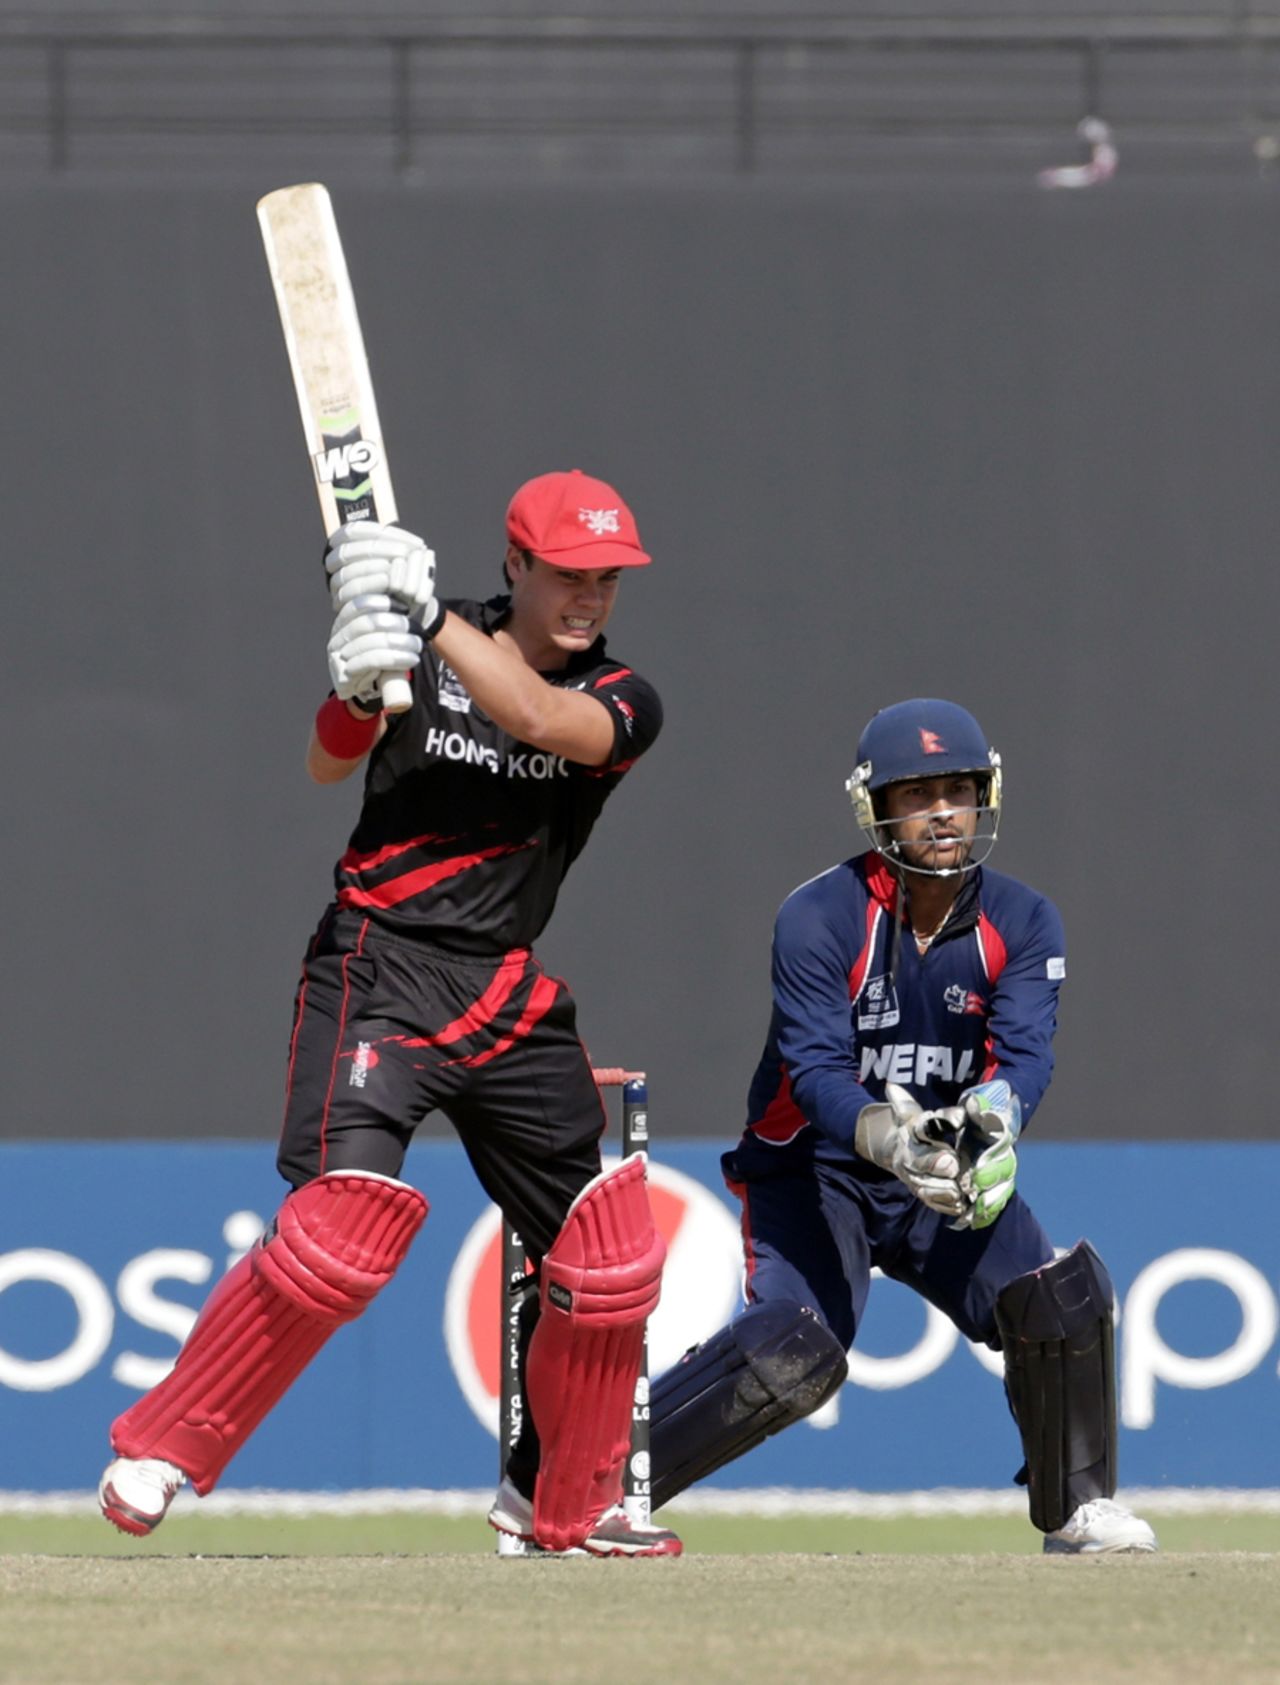 Mark Chapman of Hong Kong batting during the Hong Kong v Nepal Quarter Final match 60 at the ICC World Twenty20 Qualifiers at the Zayed Cricket Stadium on November 27, 2013 in Abu Dhabi, United Arab Emirates. (Photo by Graham Crouch-IDI/IDI via Getty Images)
